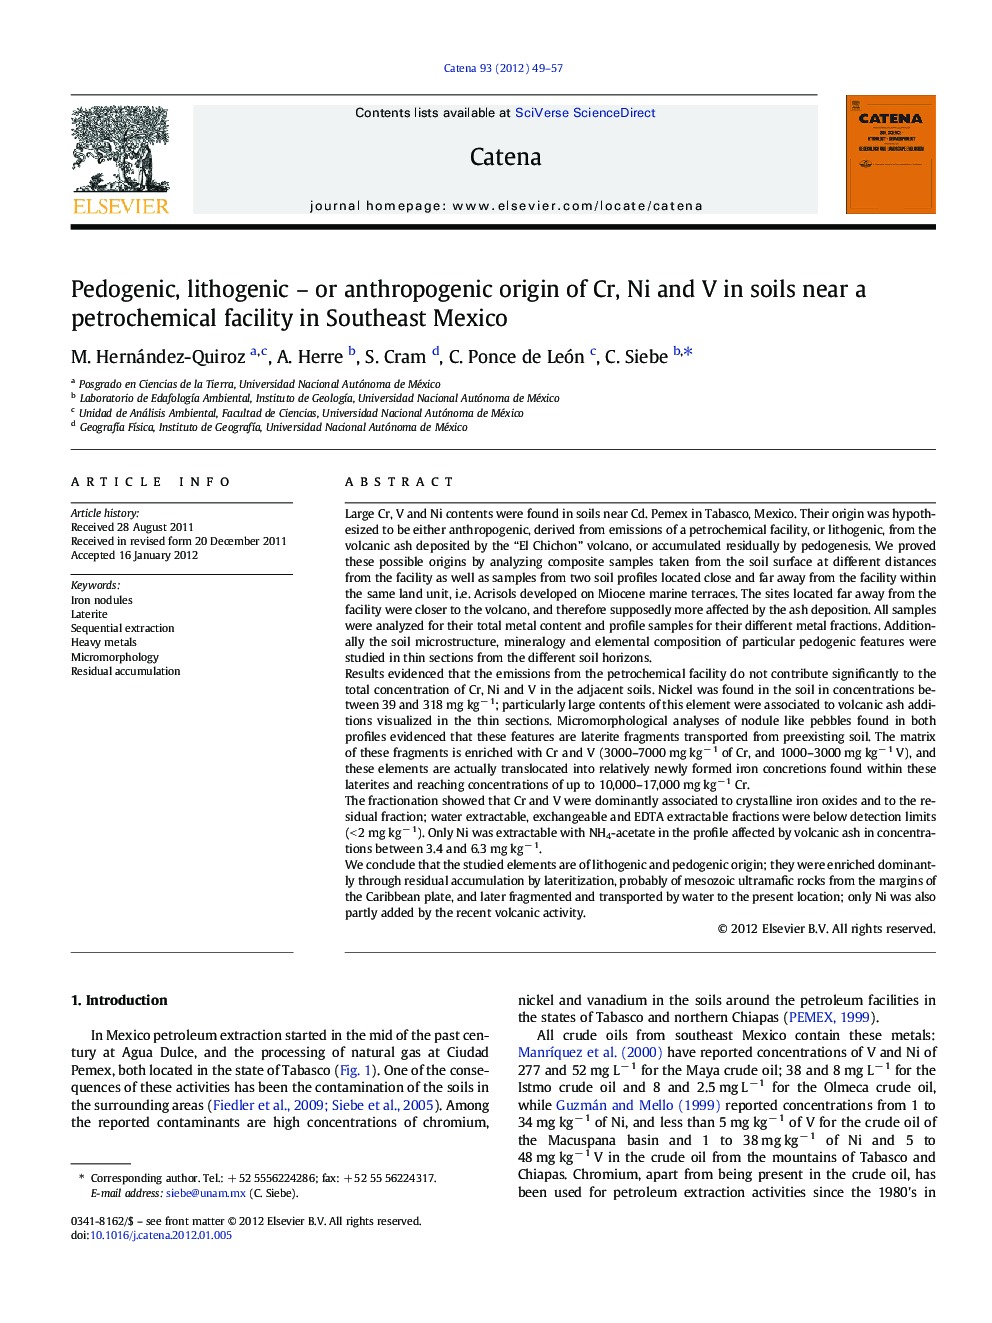 Pedogenic, lithogenic – or anthropogenic origin of Cr, Ni and V in soils near a petrochemical facility in Southeast Mexico